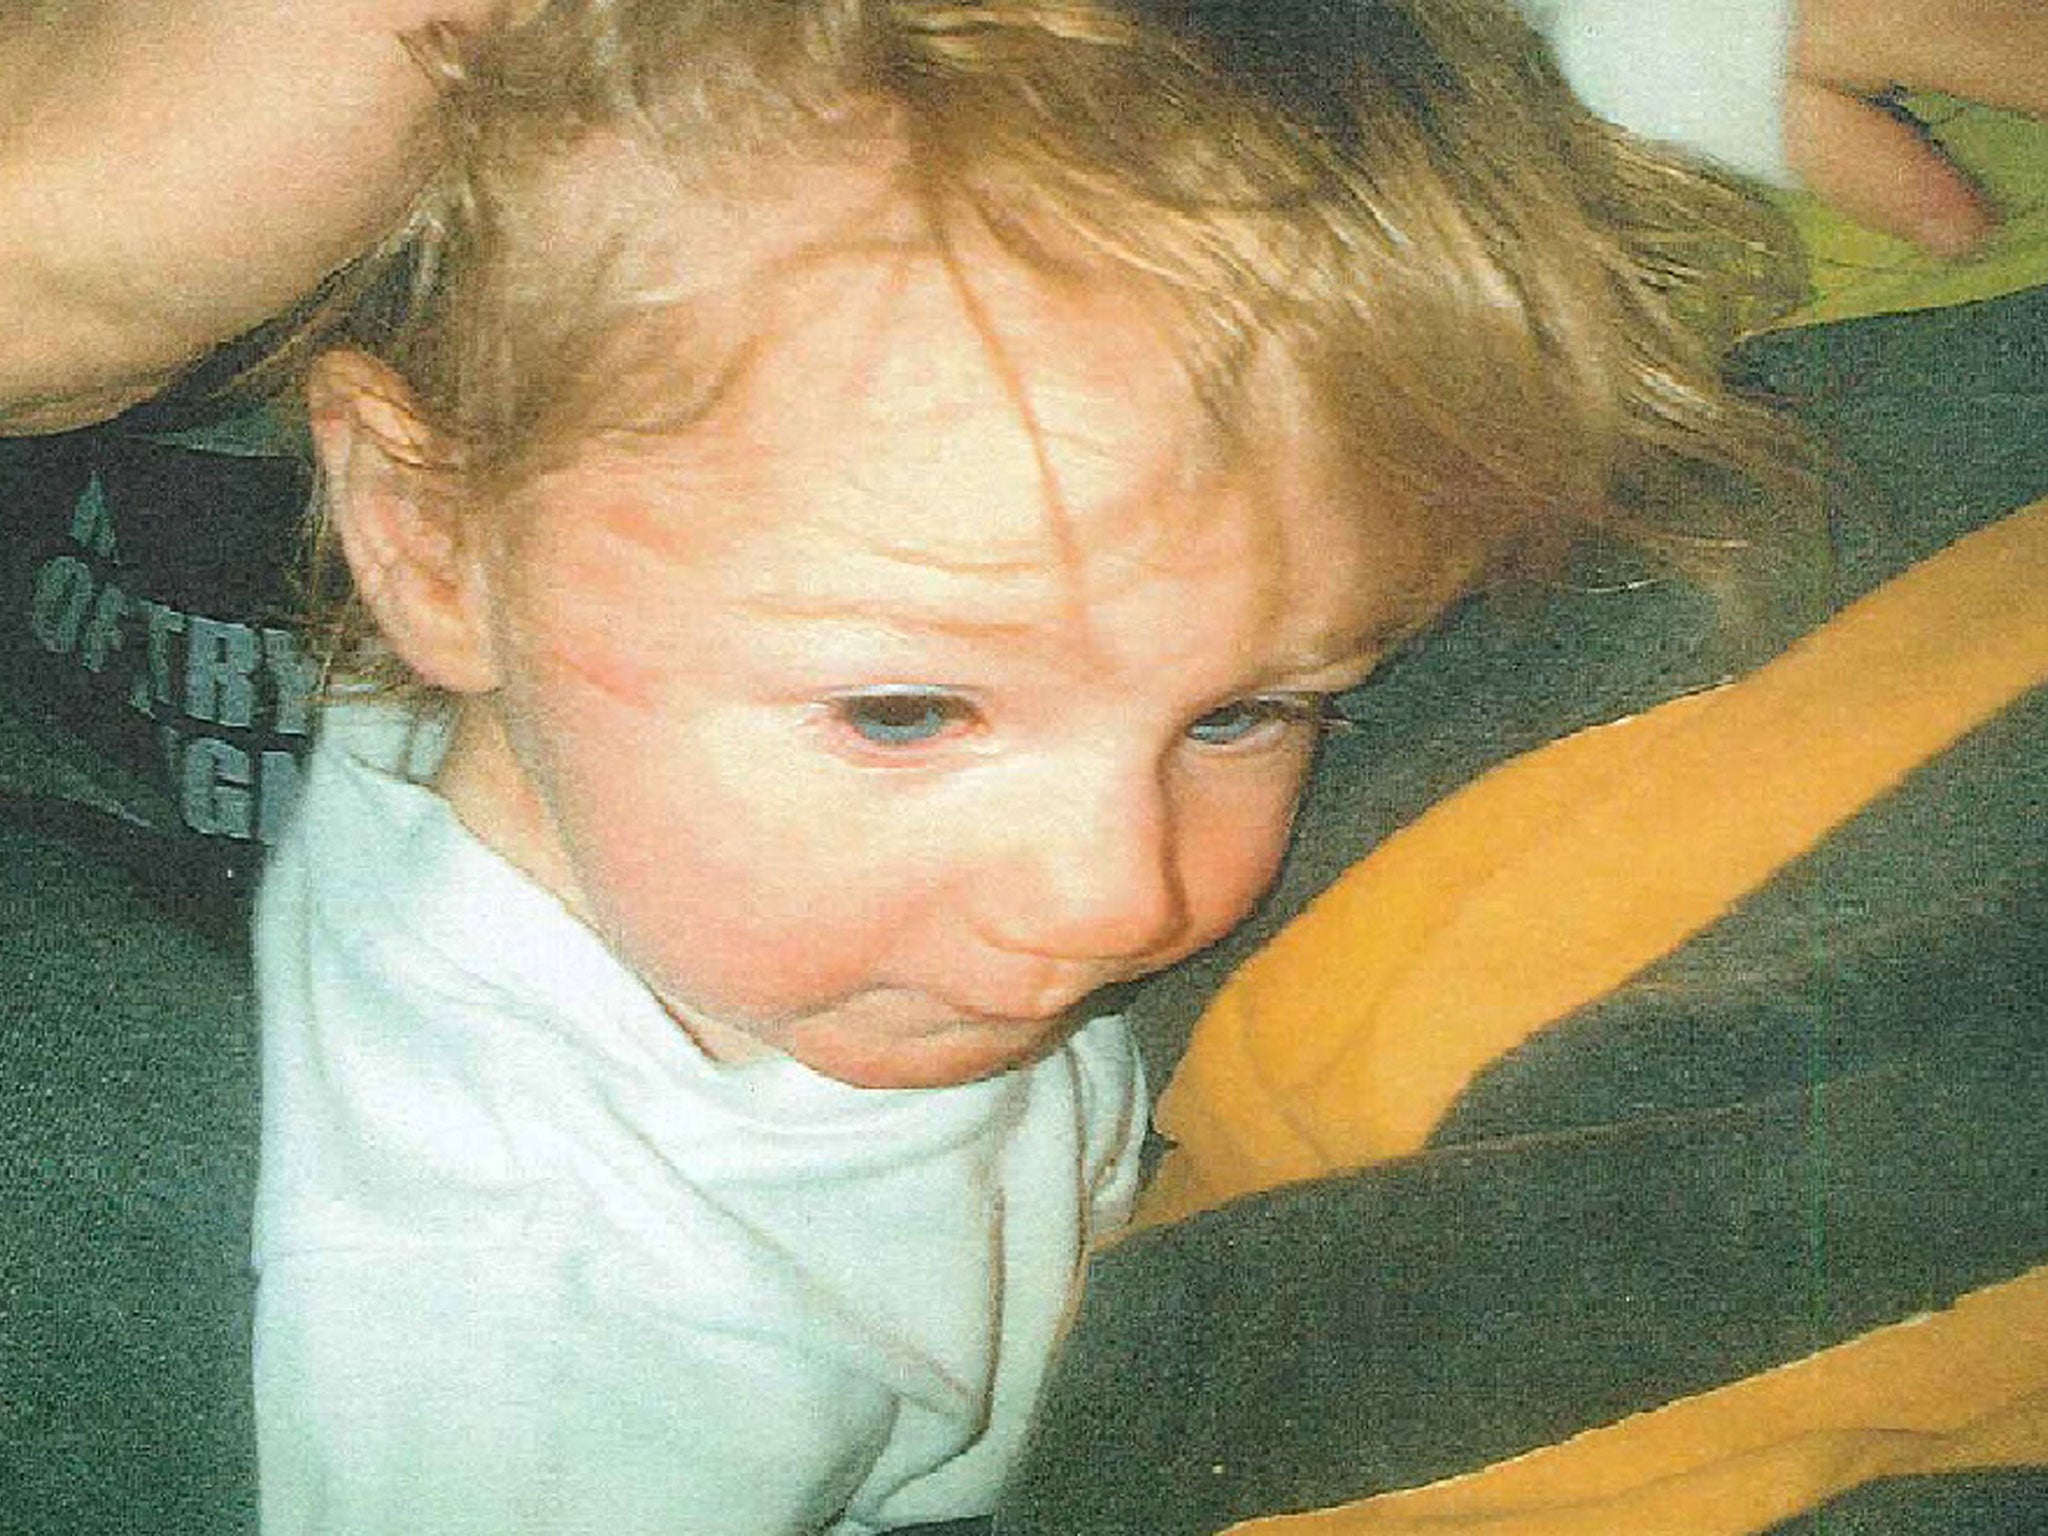 Photo issued by Staffordshire Police of Ayeeshia Jane Smith before her death showing marks to her face and the underside of her chin